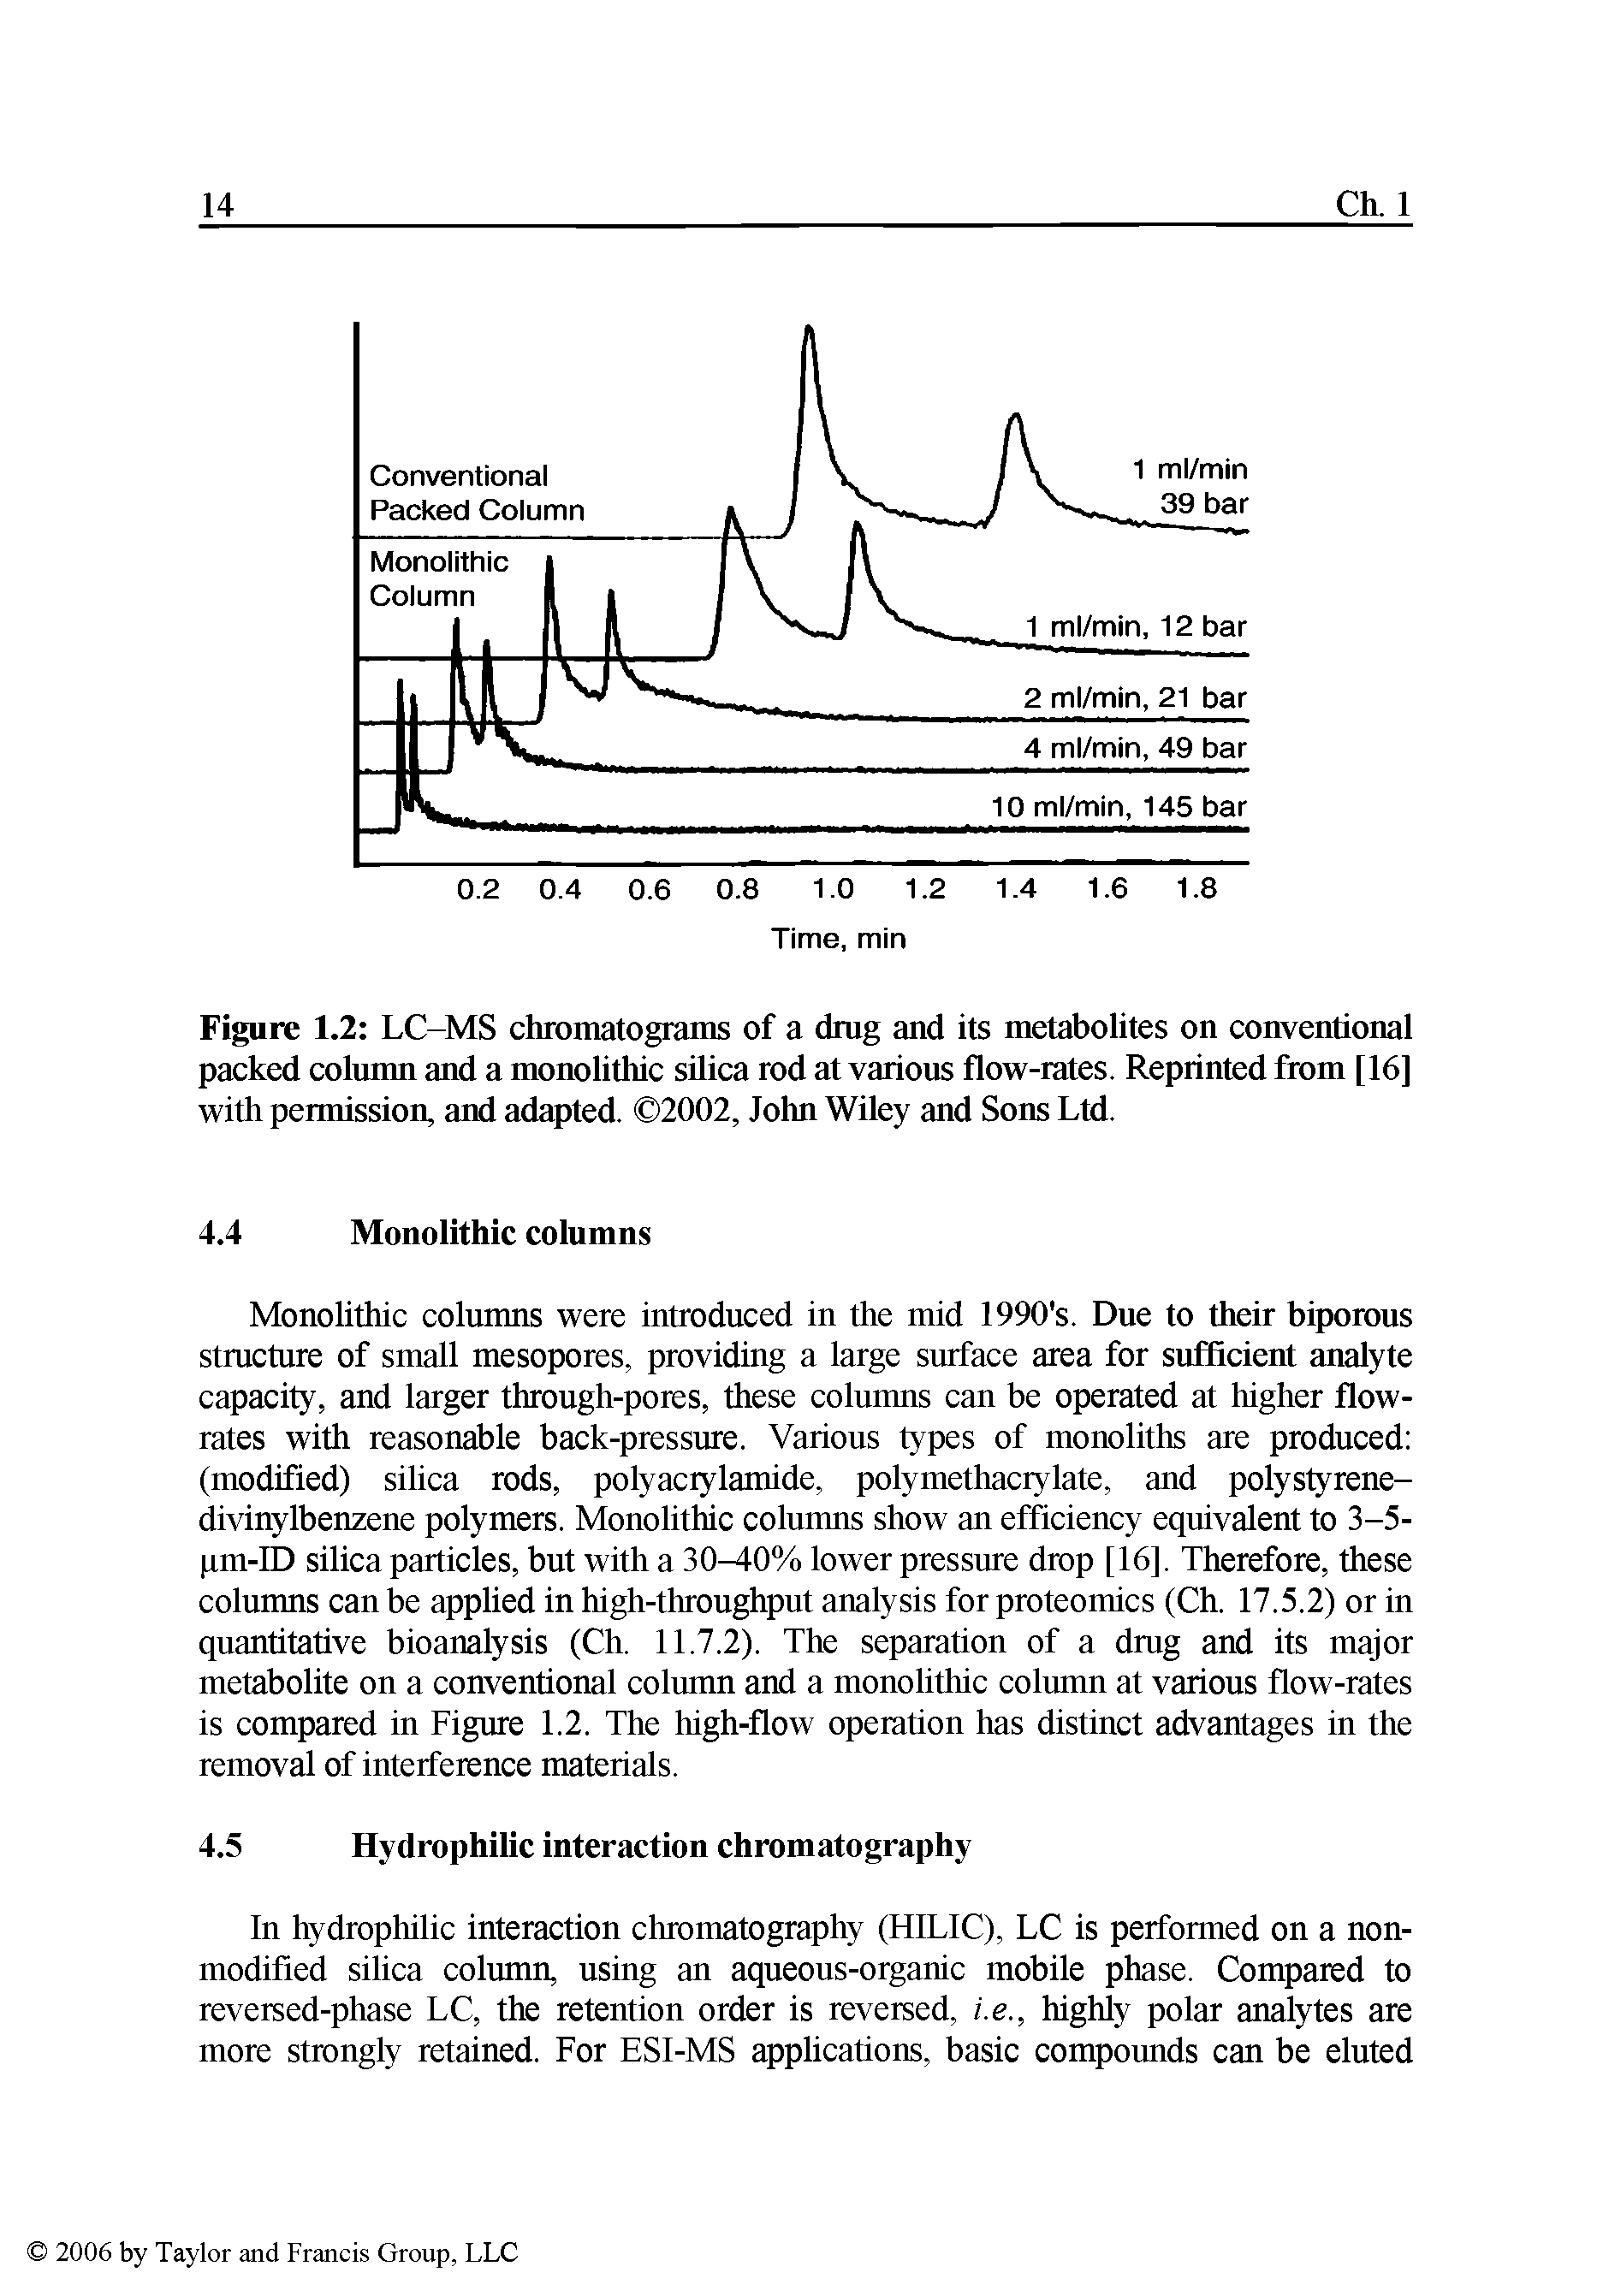 Figure 1.2 LC-MS chromatograms of a drag and its metabolites on conventional packed column and a monolithic silica rod at various flow-rates. Reprinted from [16] with permission, and adapted. 2002, John Wiley and Sons Ltd.